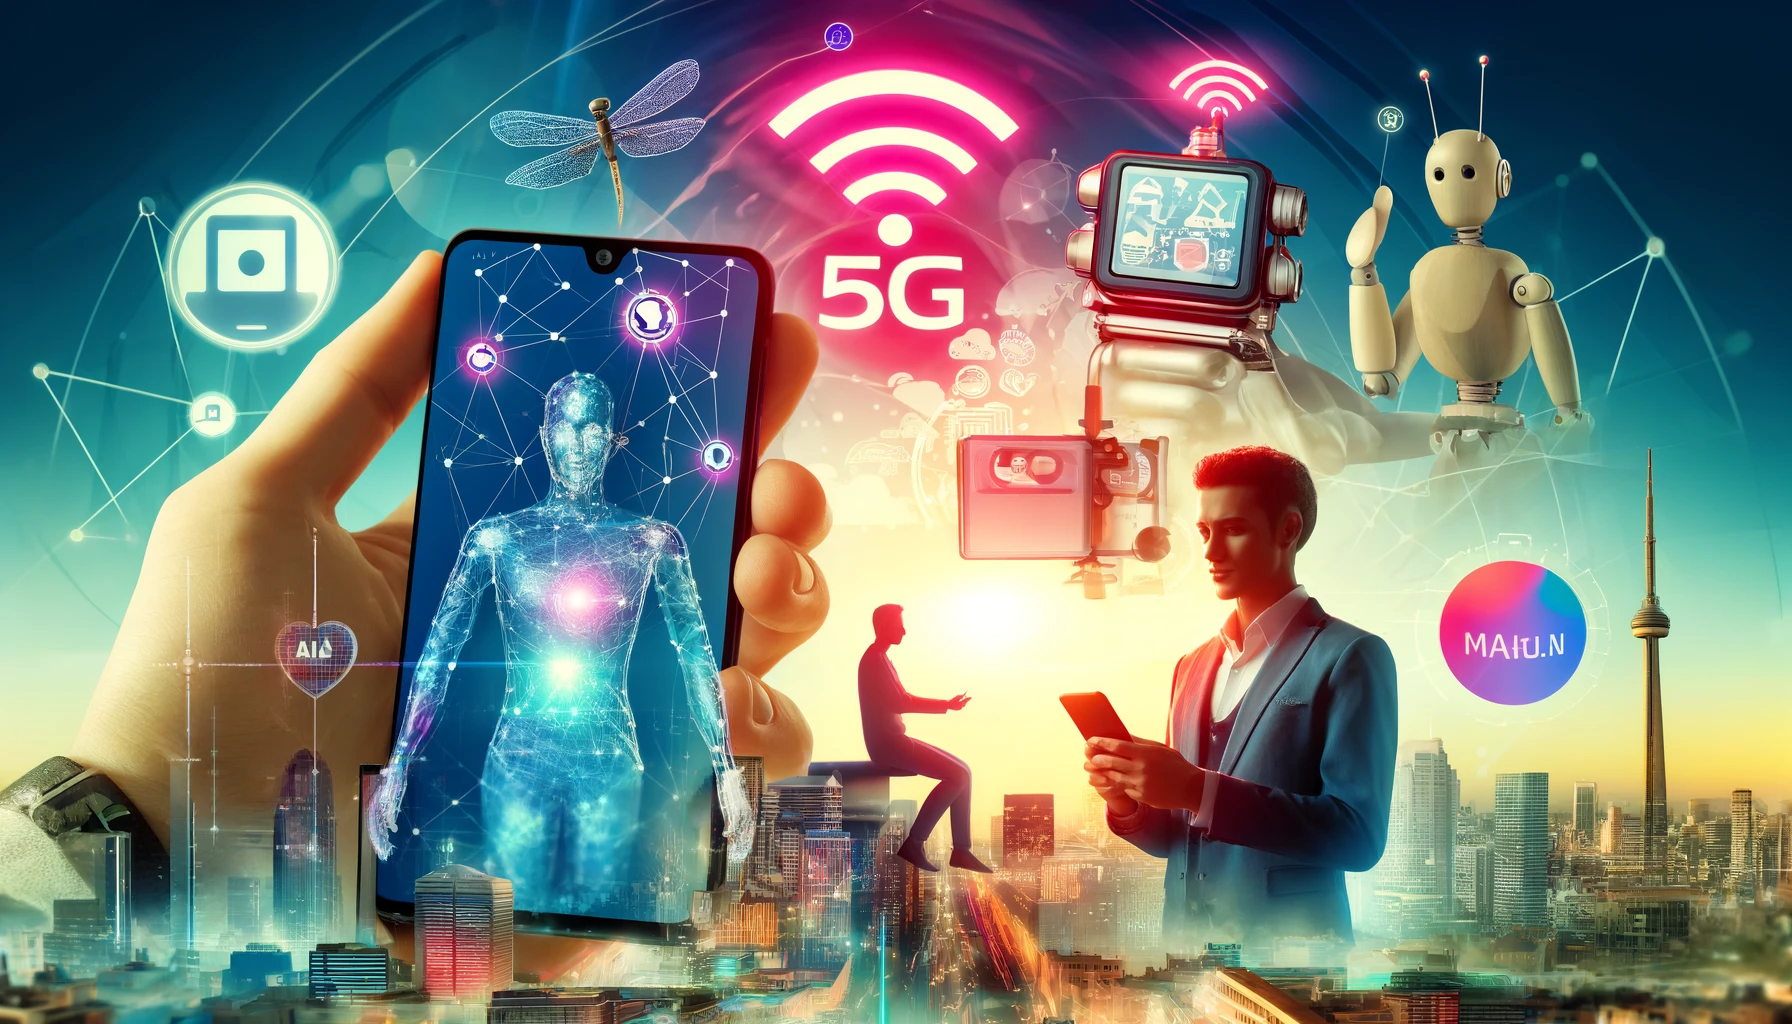 A digital collage showing innovations in mobile technology including a foldable smartphone, 5G connectivity, AI integration, mobile payments, and health-monitoring wearables.